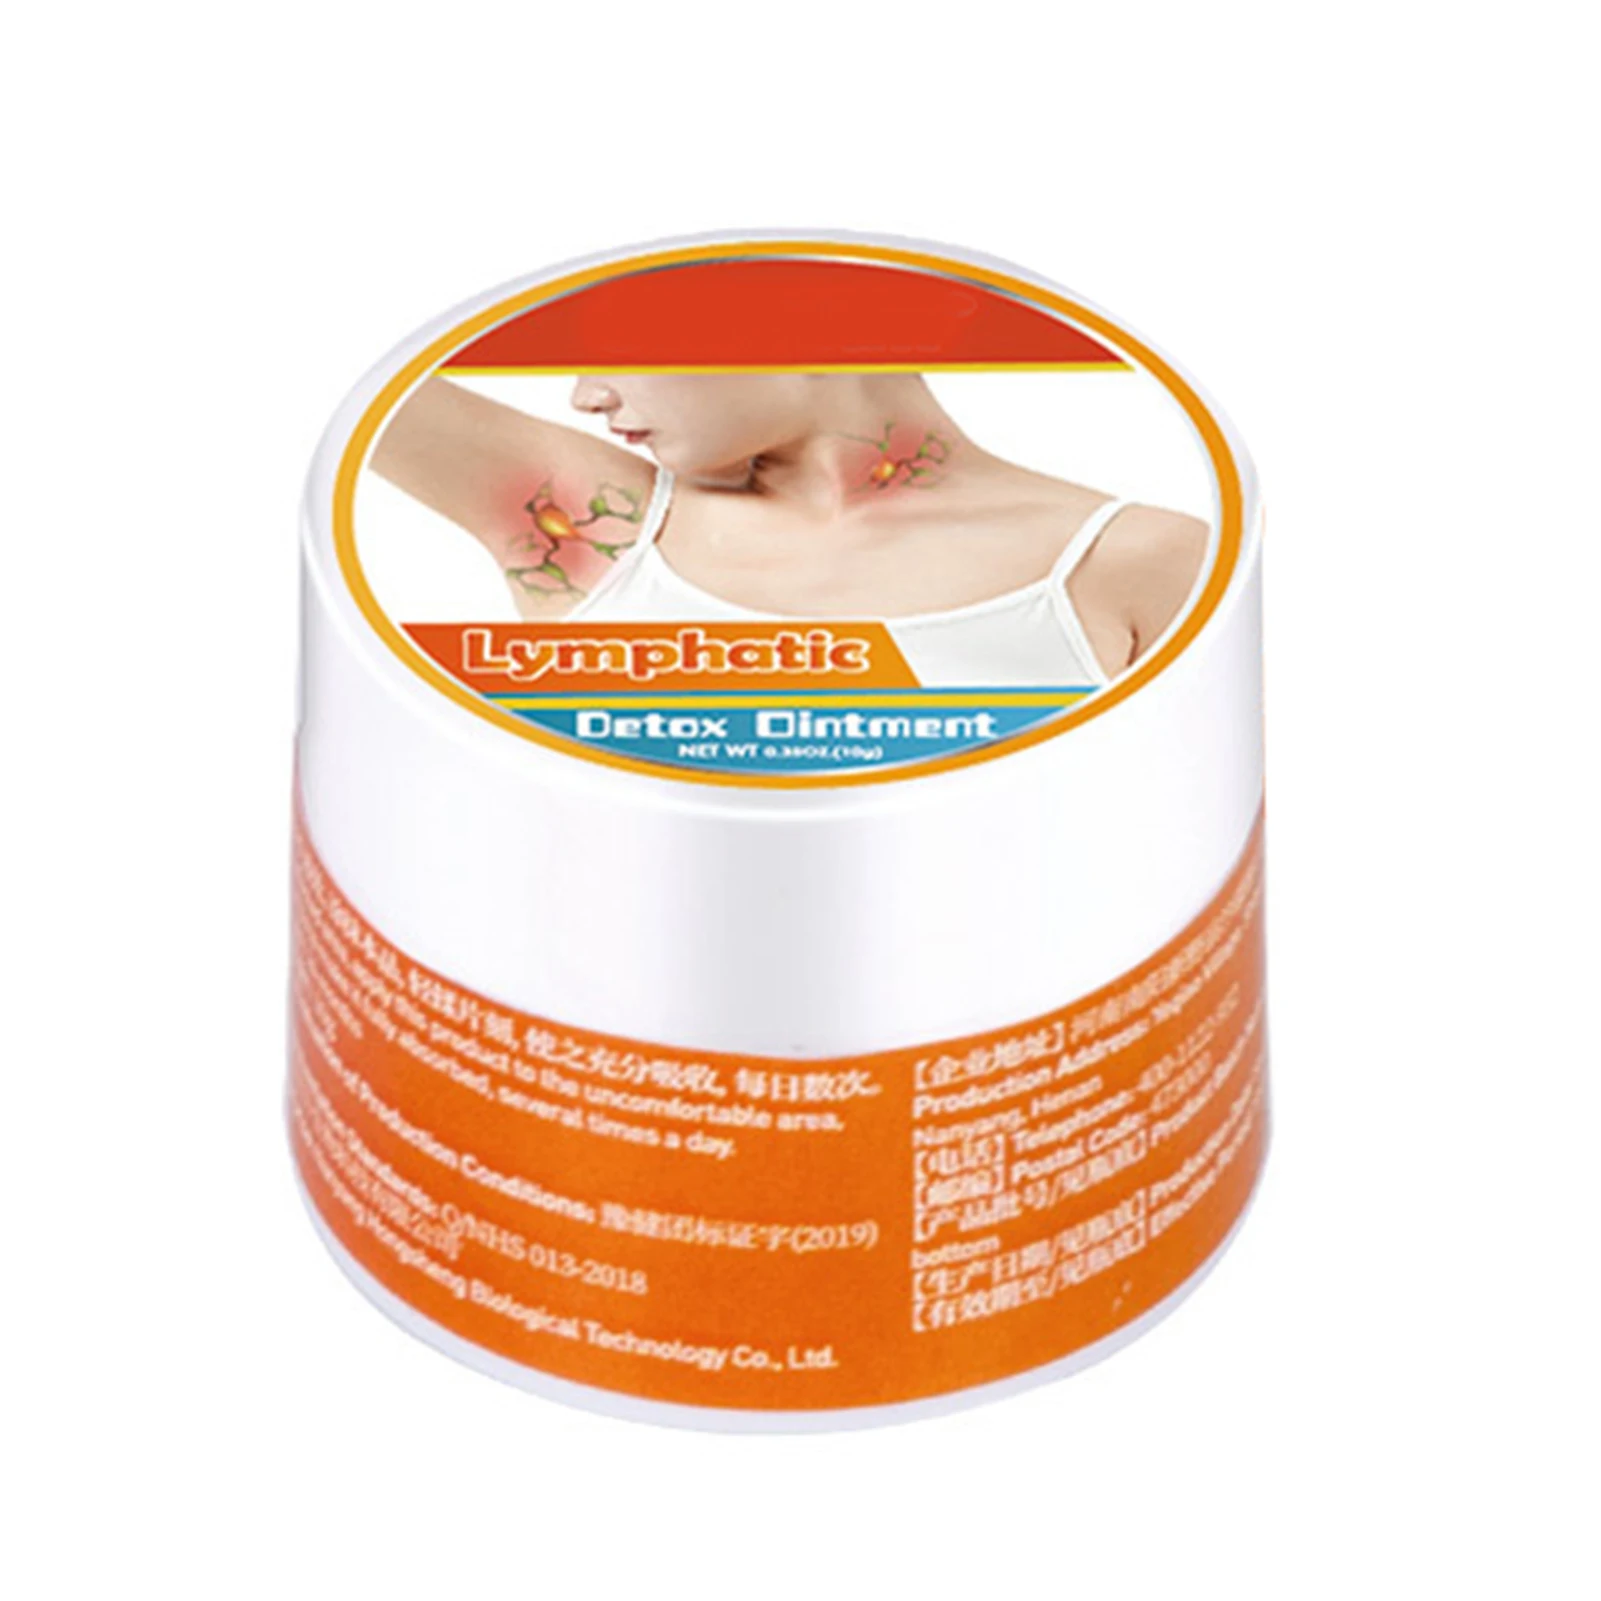 Newest Lymphatic Detox Cream  The Cream Is Delicate Applicable To Lymphadenitis images - 6